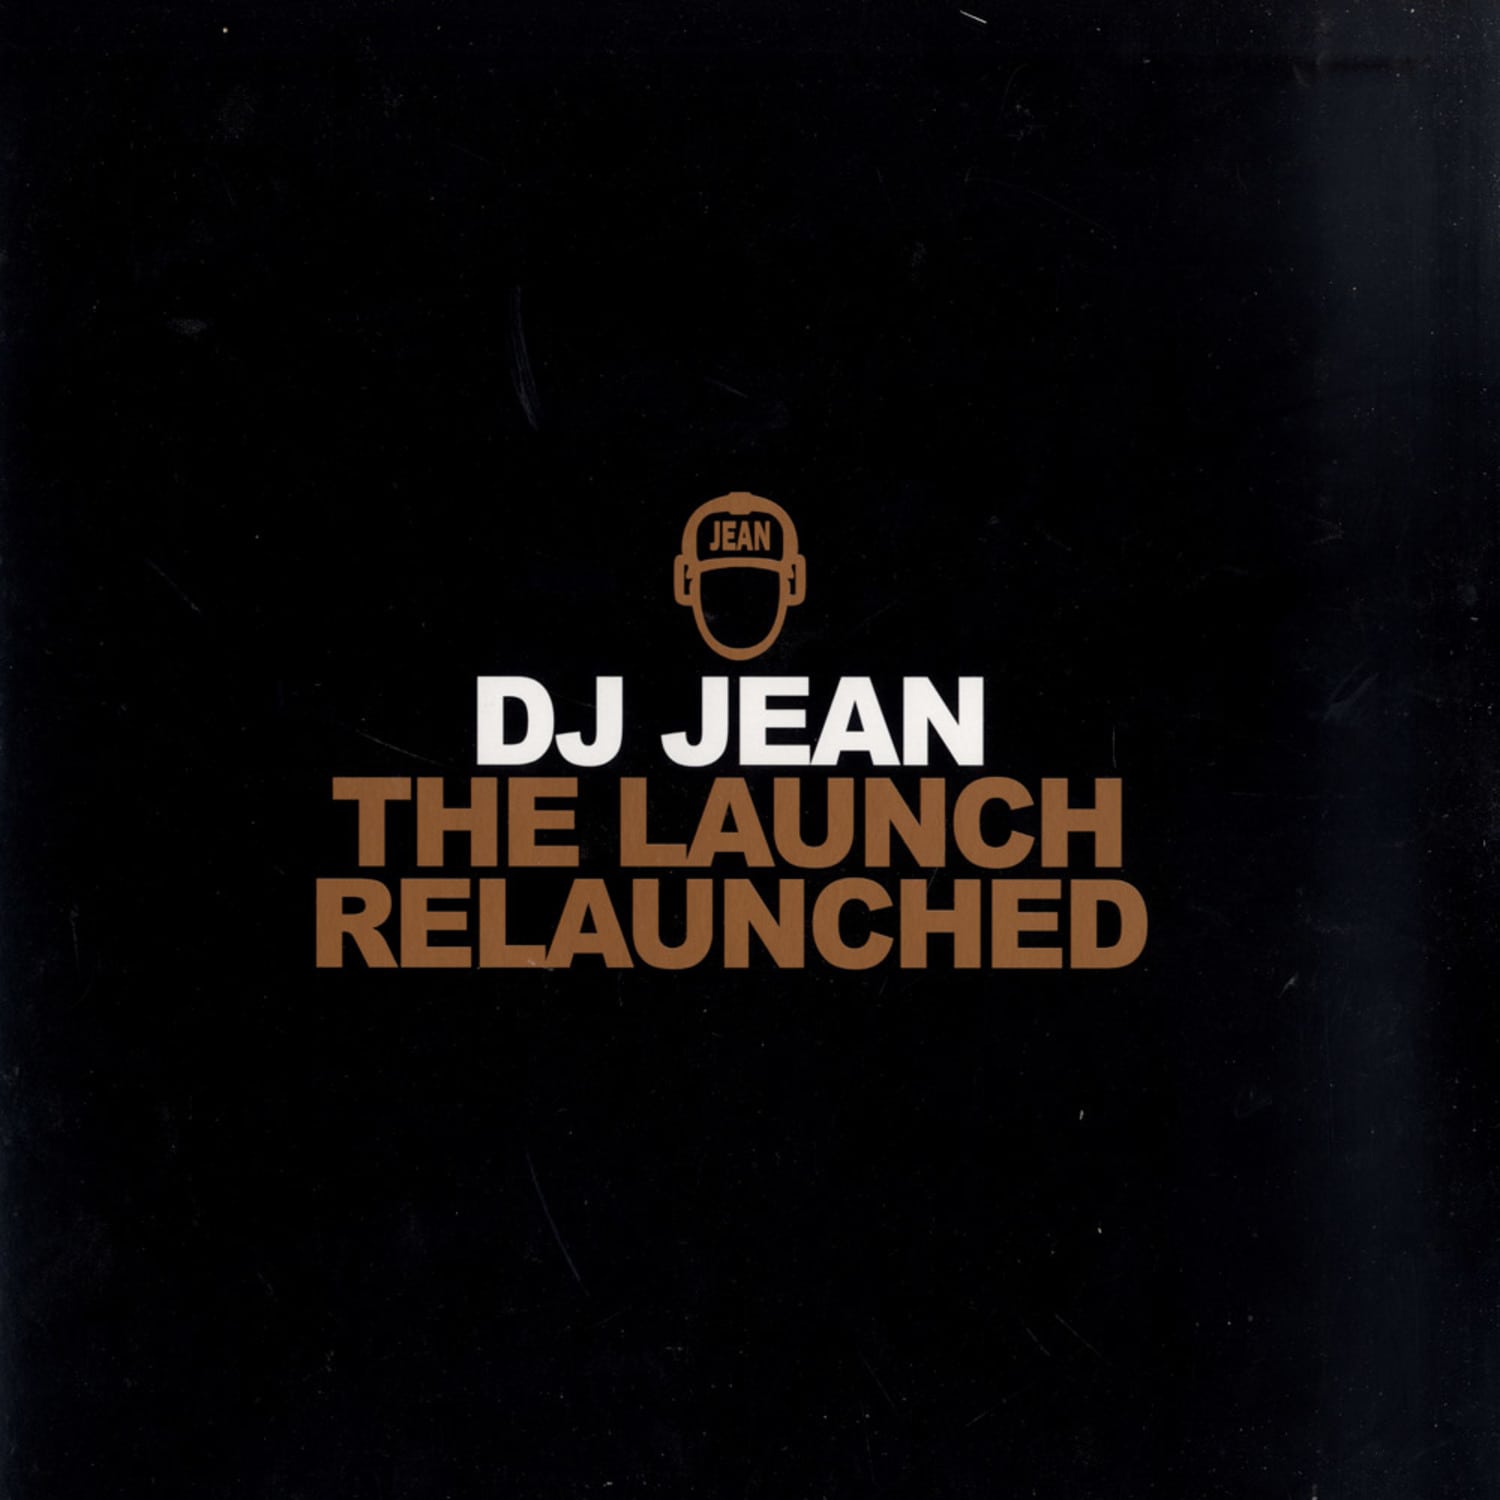 Dj Jean - THE LAUNCH RELAUNCHED 2008 